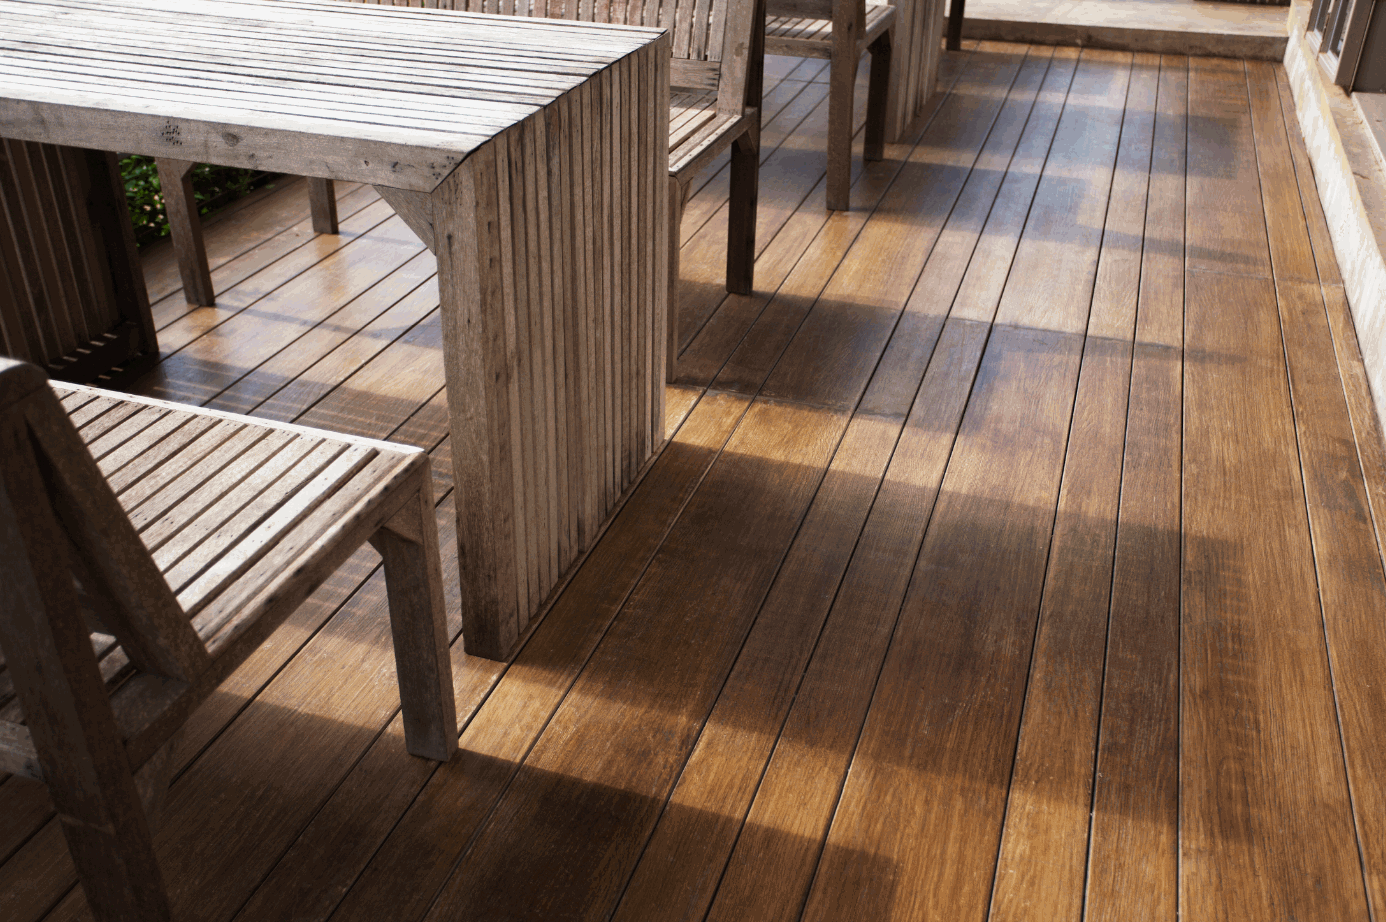 SHERA decking is the perfect exterior decking material